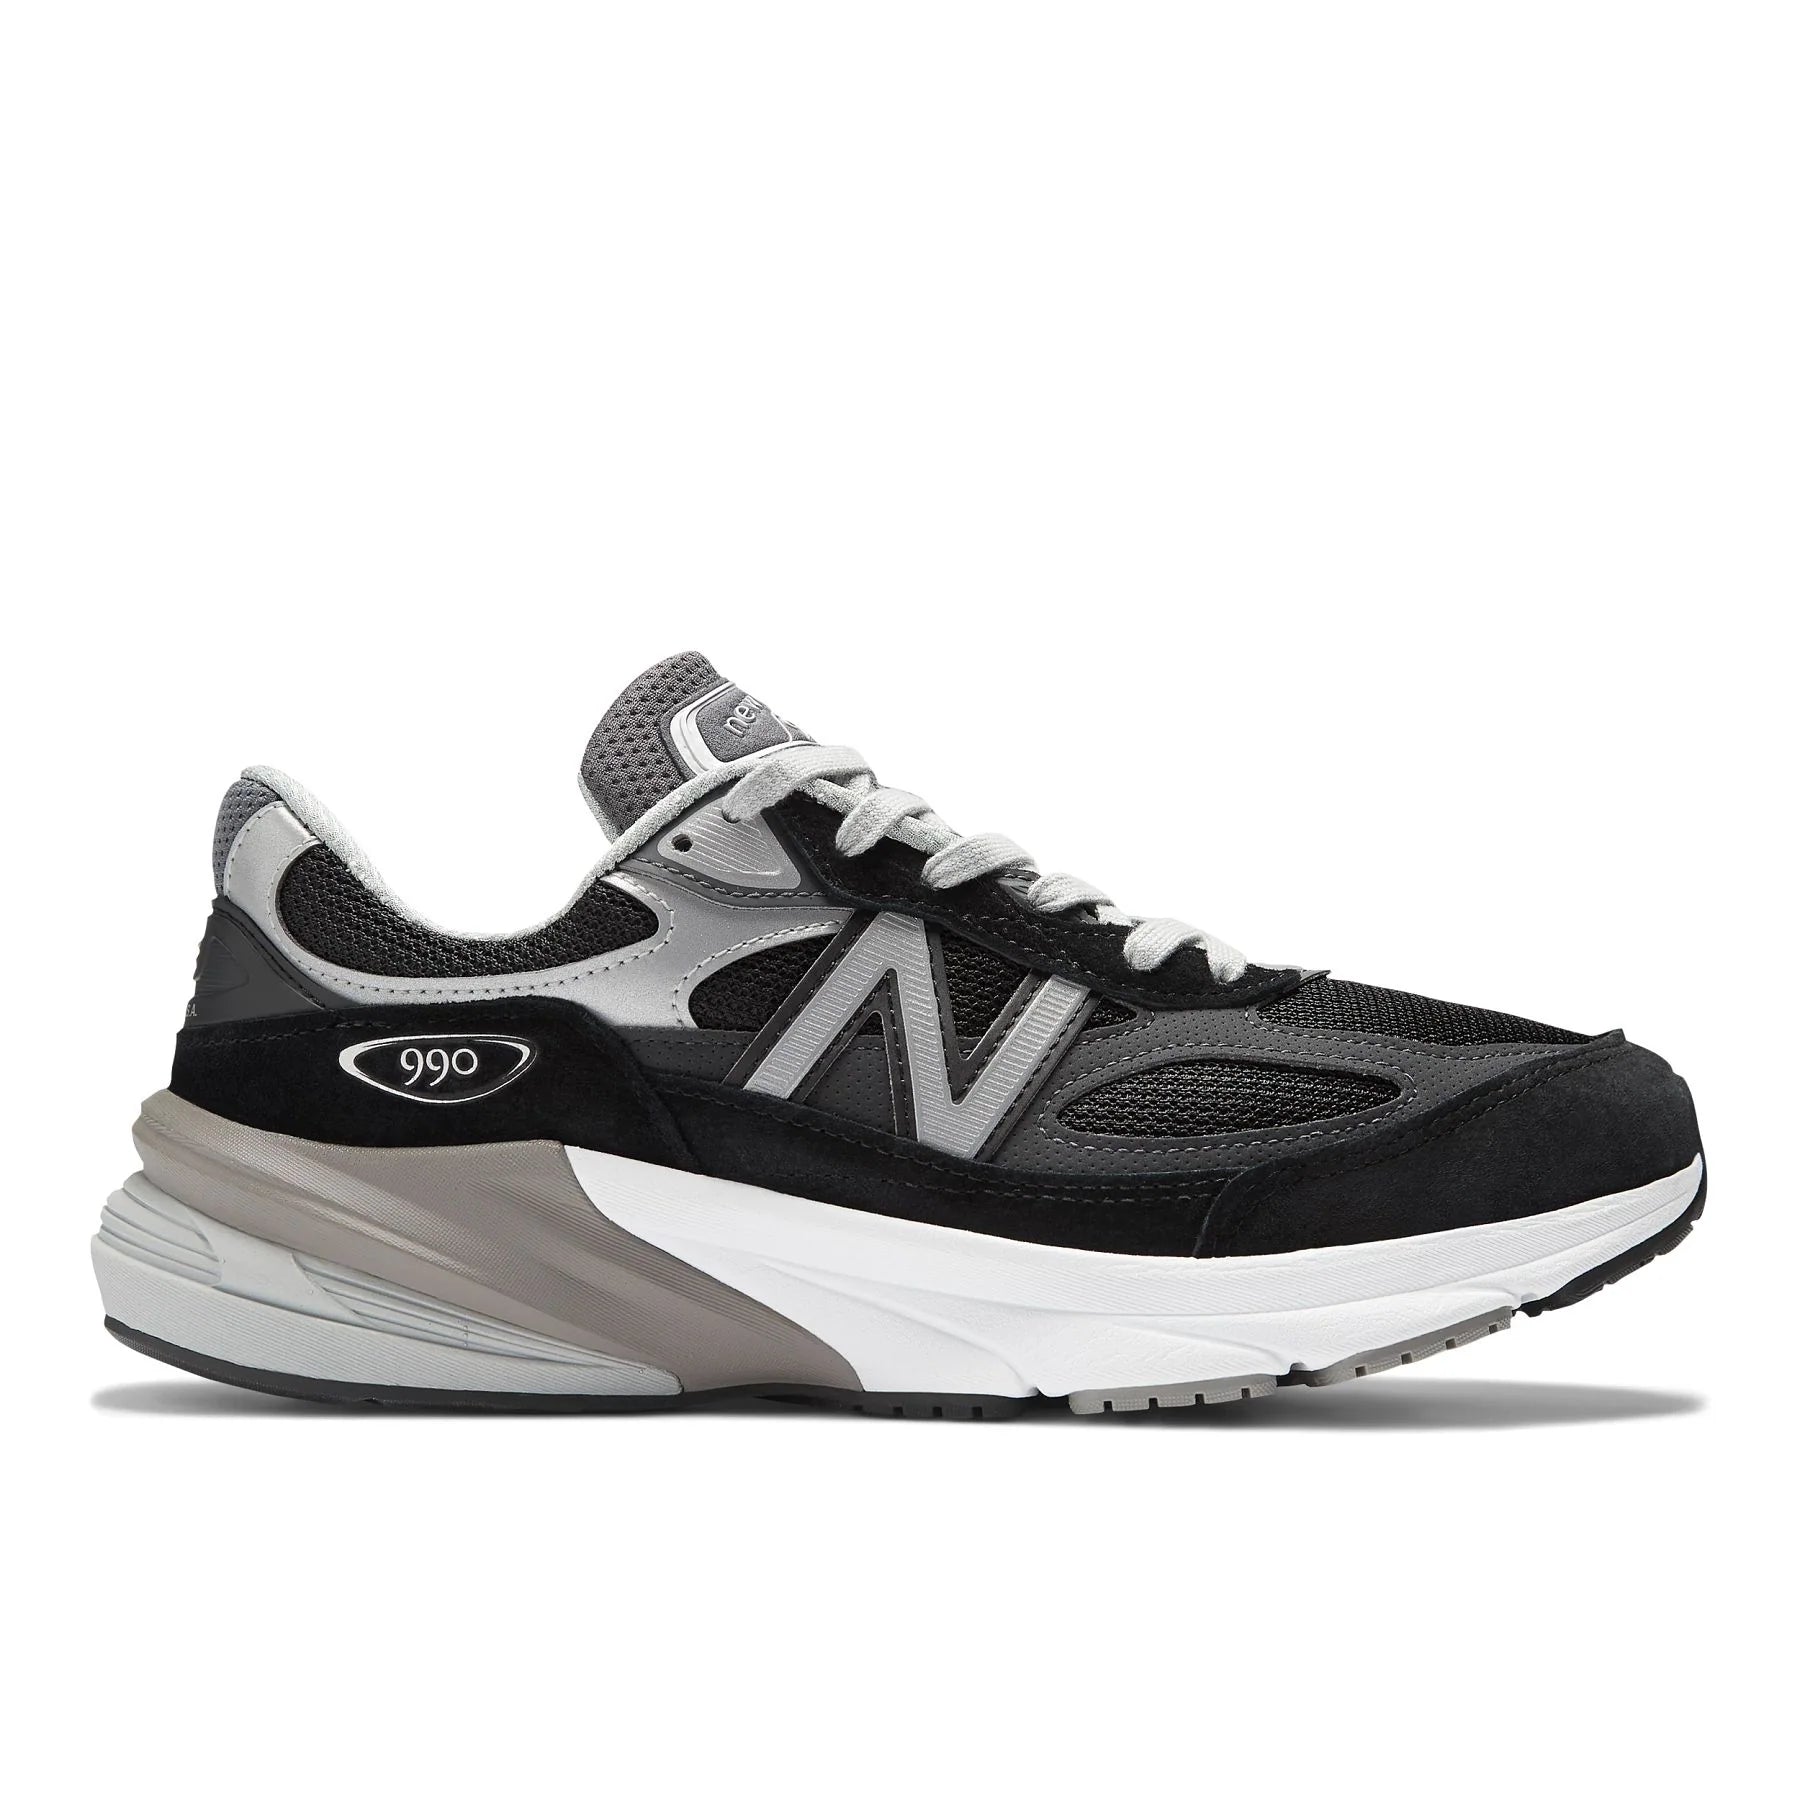 Lateral view of the Men's New Balance 990 V6 lifestyle shoe in the color Black/White